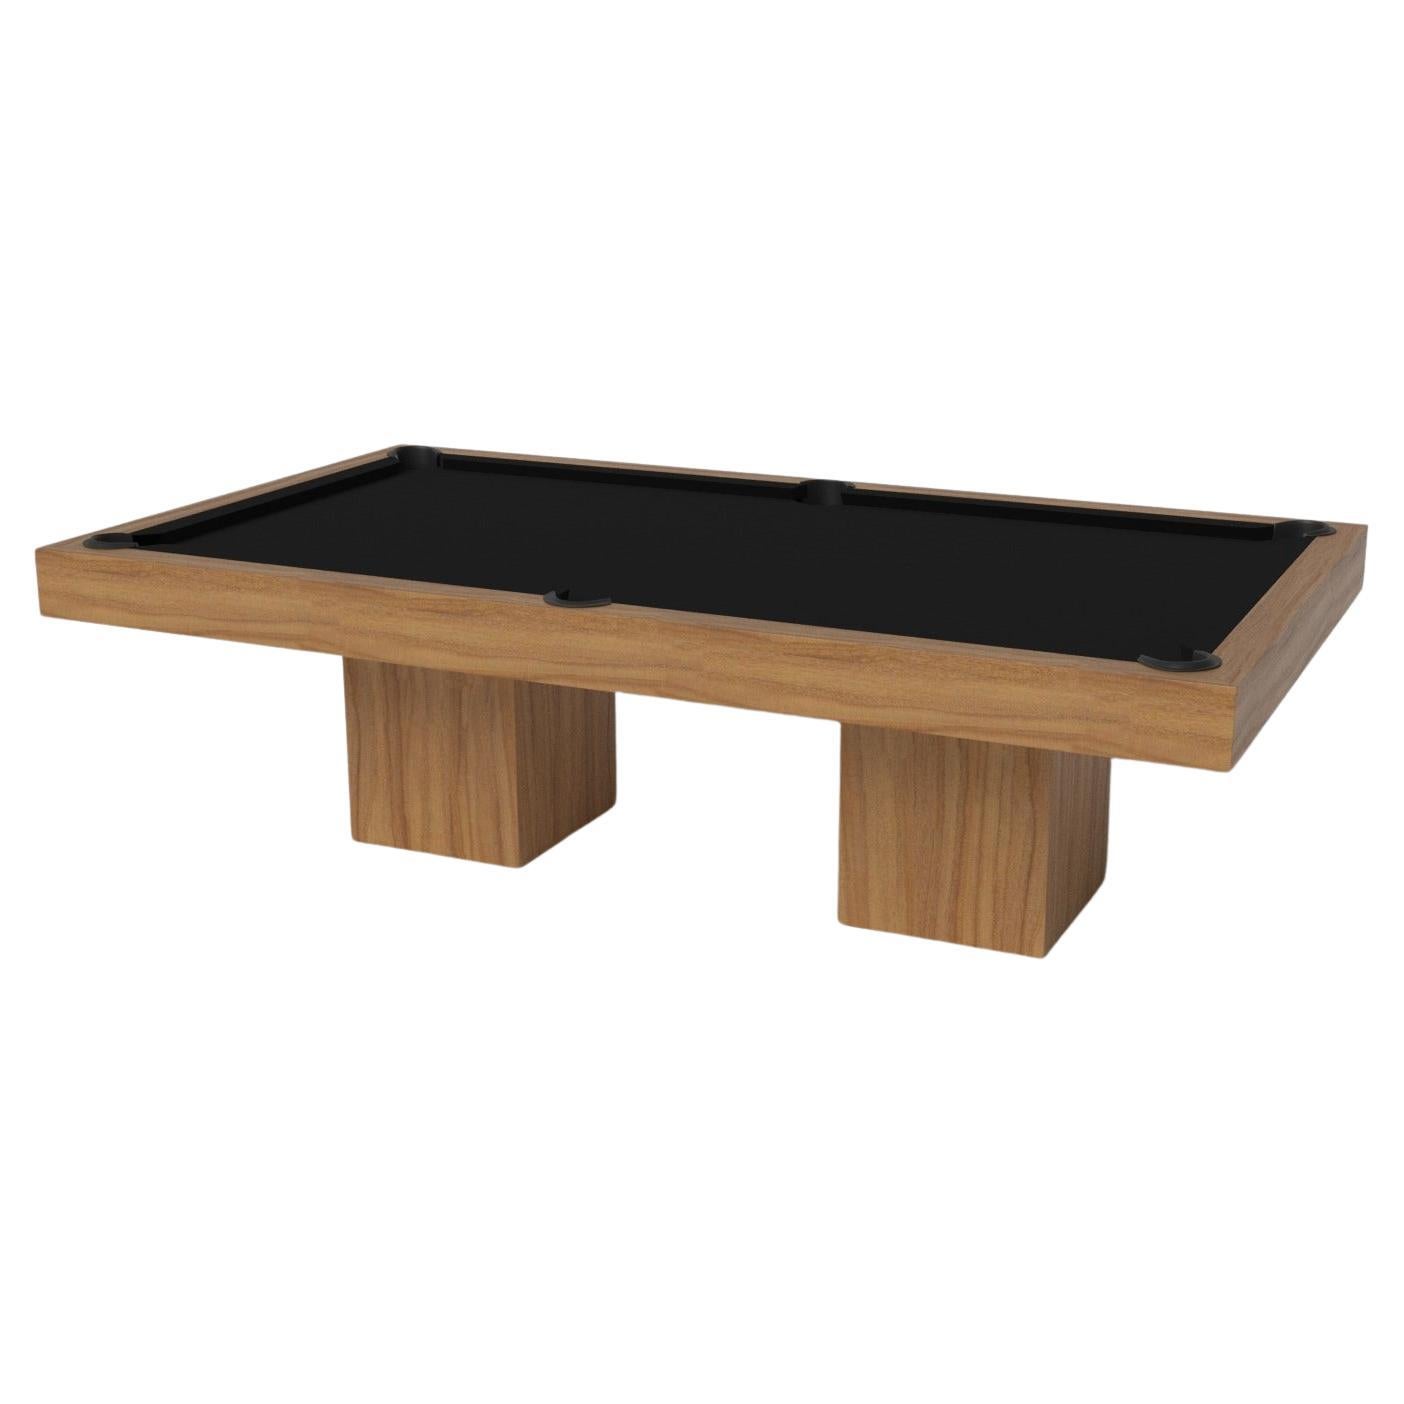 Elevate Customs Trestle Pool Table / Solid Teak Wood in 9' - Made in USA